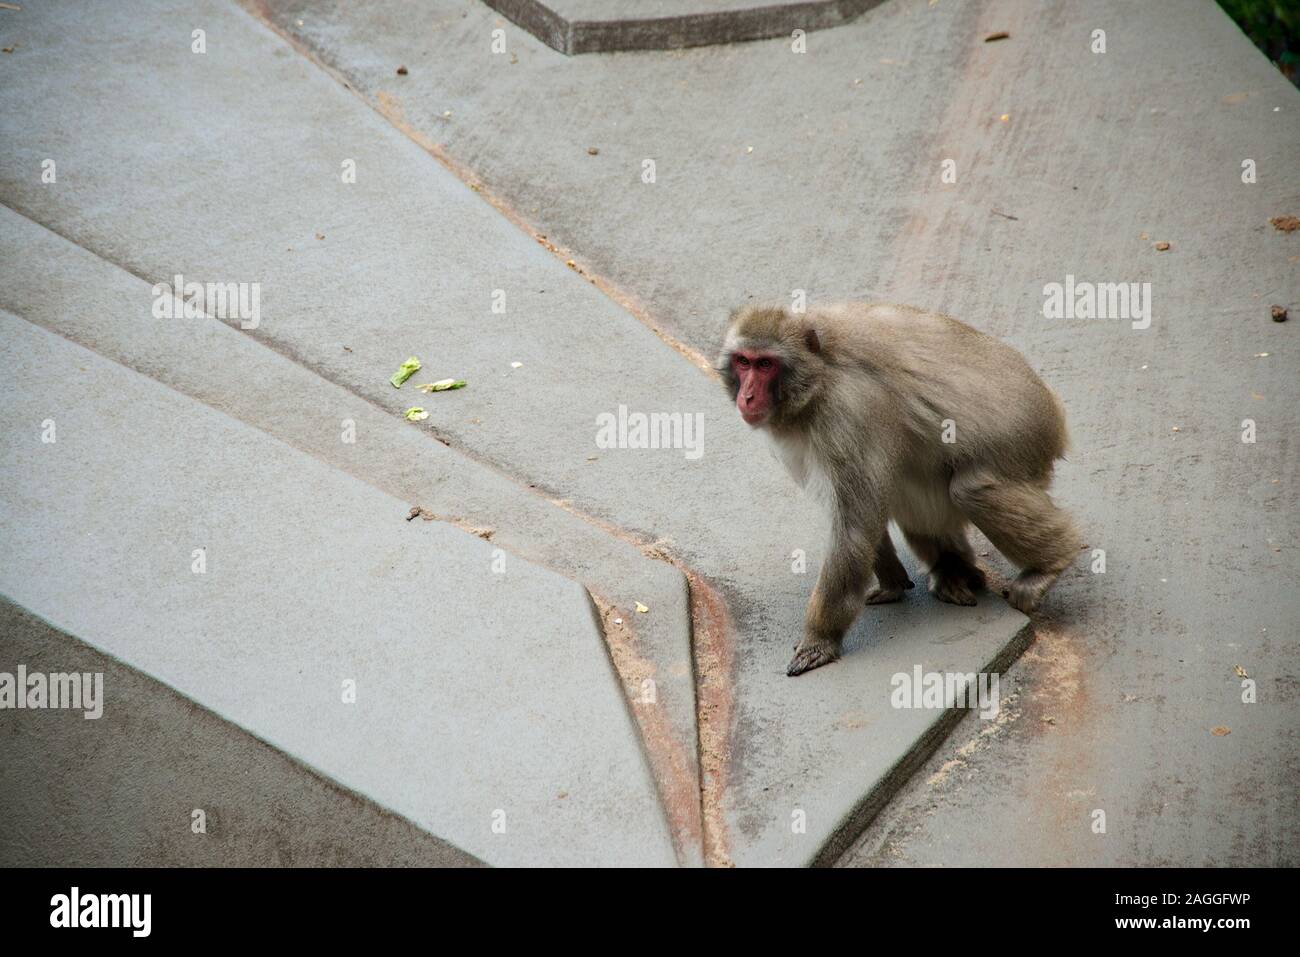 Amsterdam Zoo single baboon take from above Stock Photo